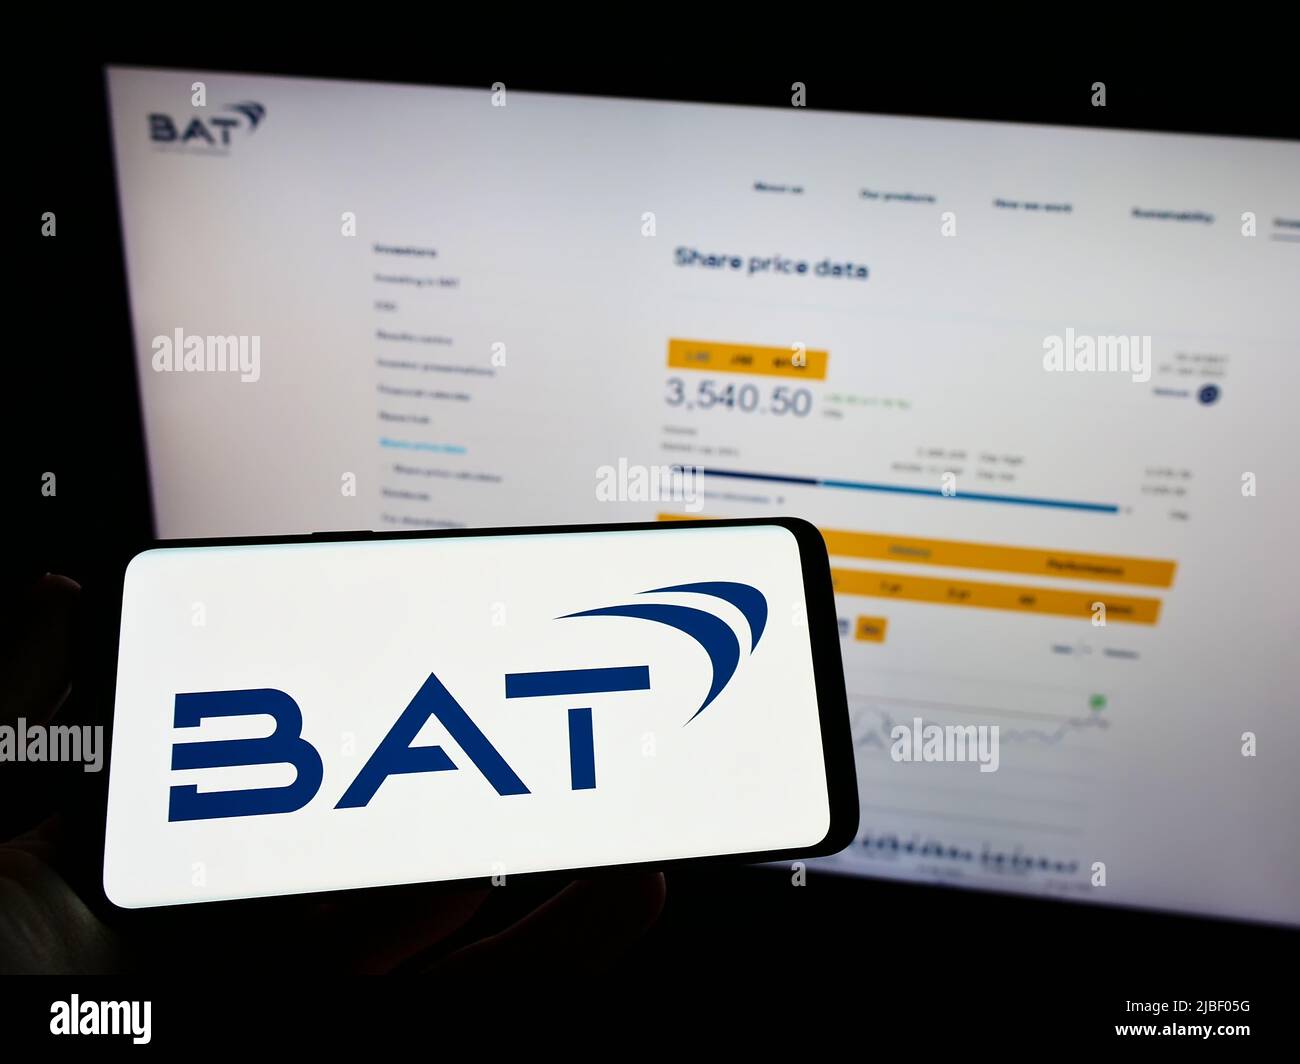 Person holding mobile phone with logo of company British American Tobacco plc (BAT) on screen in front of webpage. Focus on phone display. Stock Photo